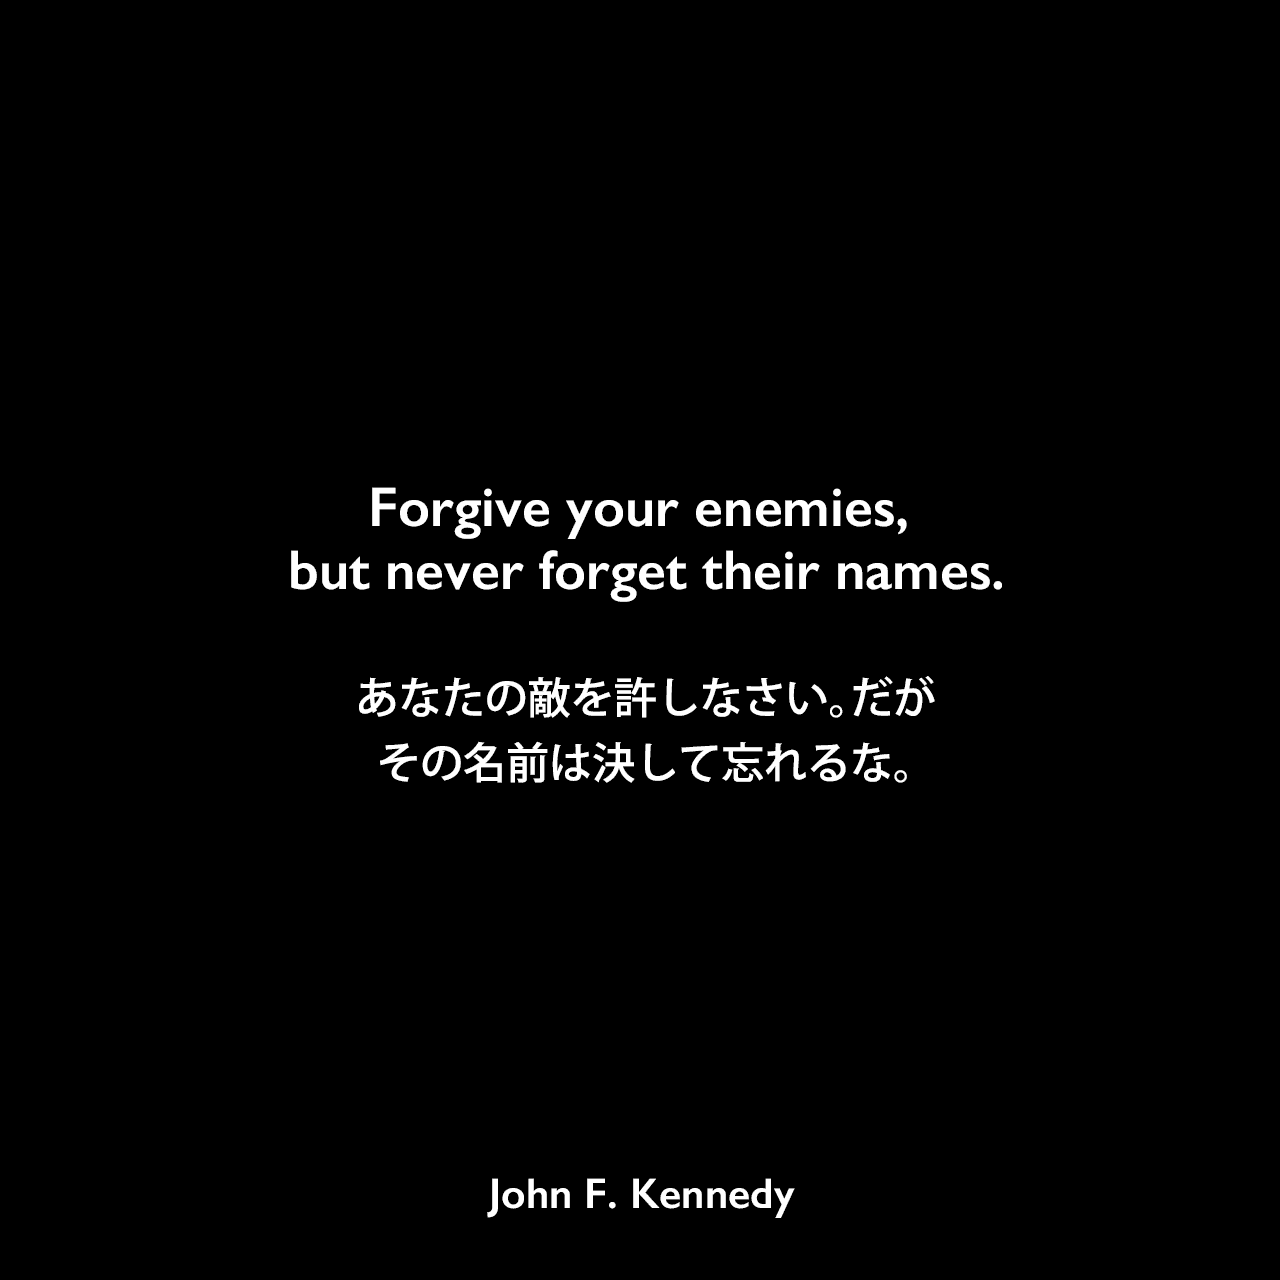 Forgive your enemies, but never forget their names.あなたの敵を許しなさい。だが、その名前は決して忘れるな。John F Kennedy